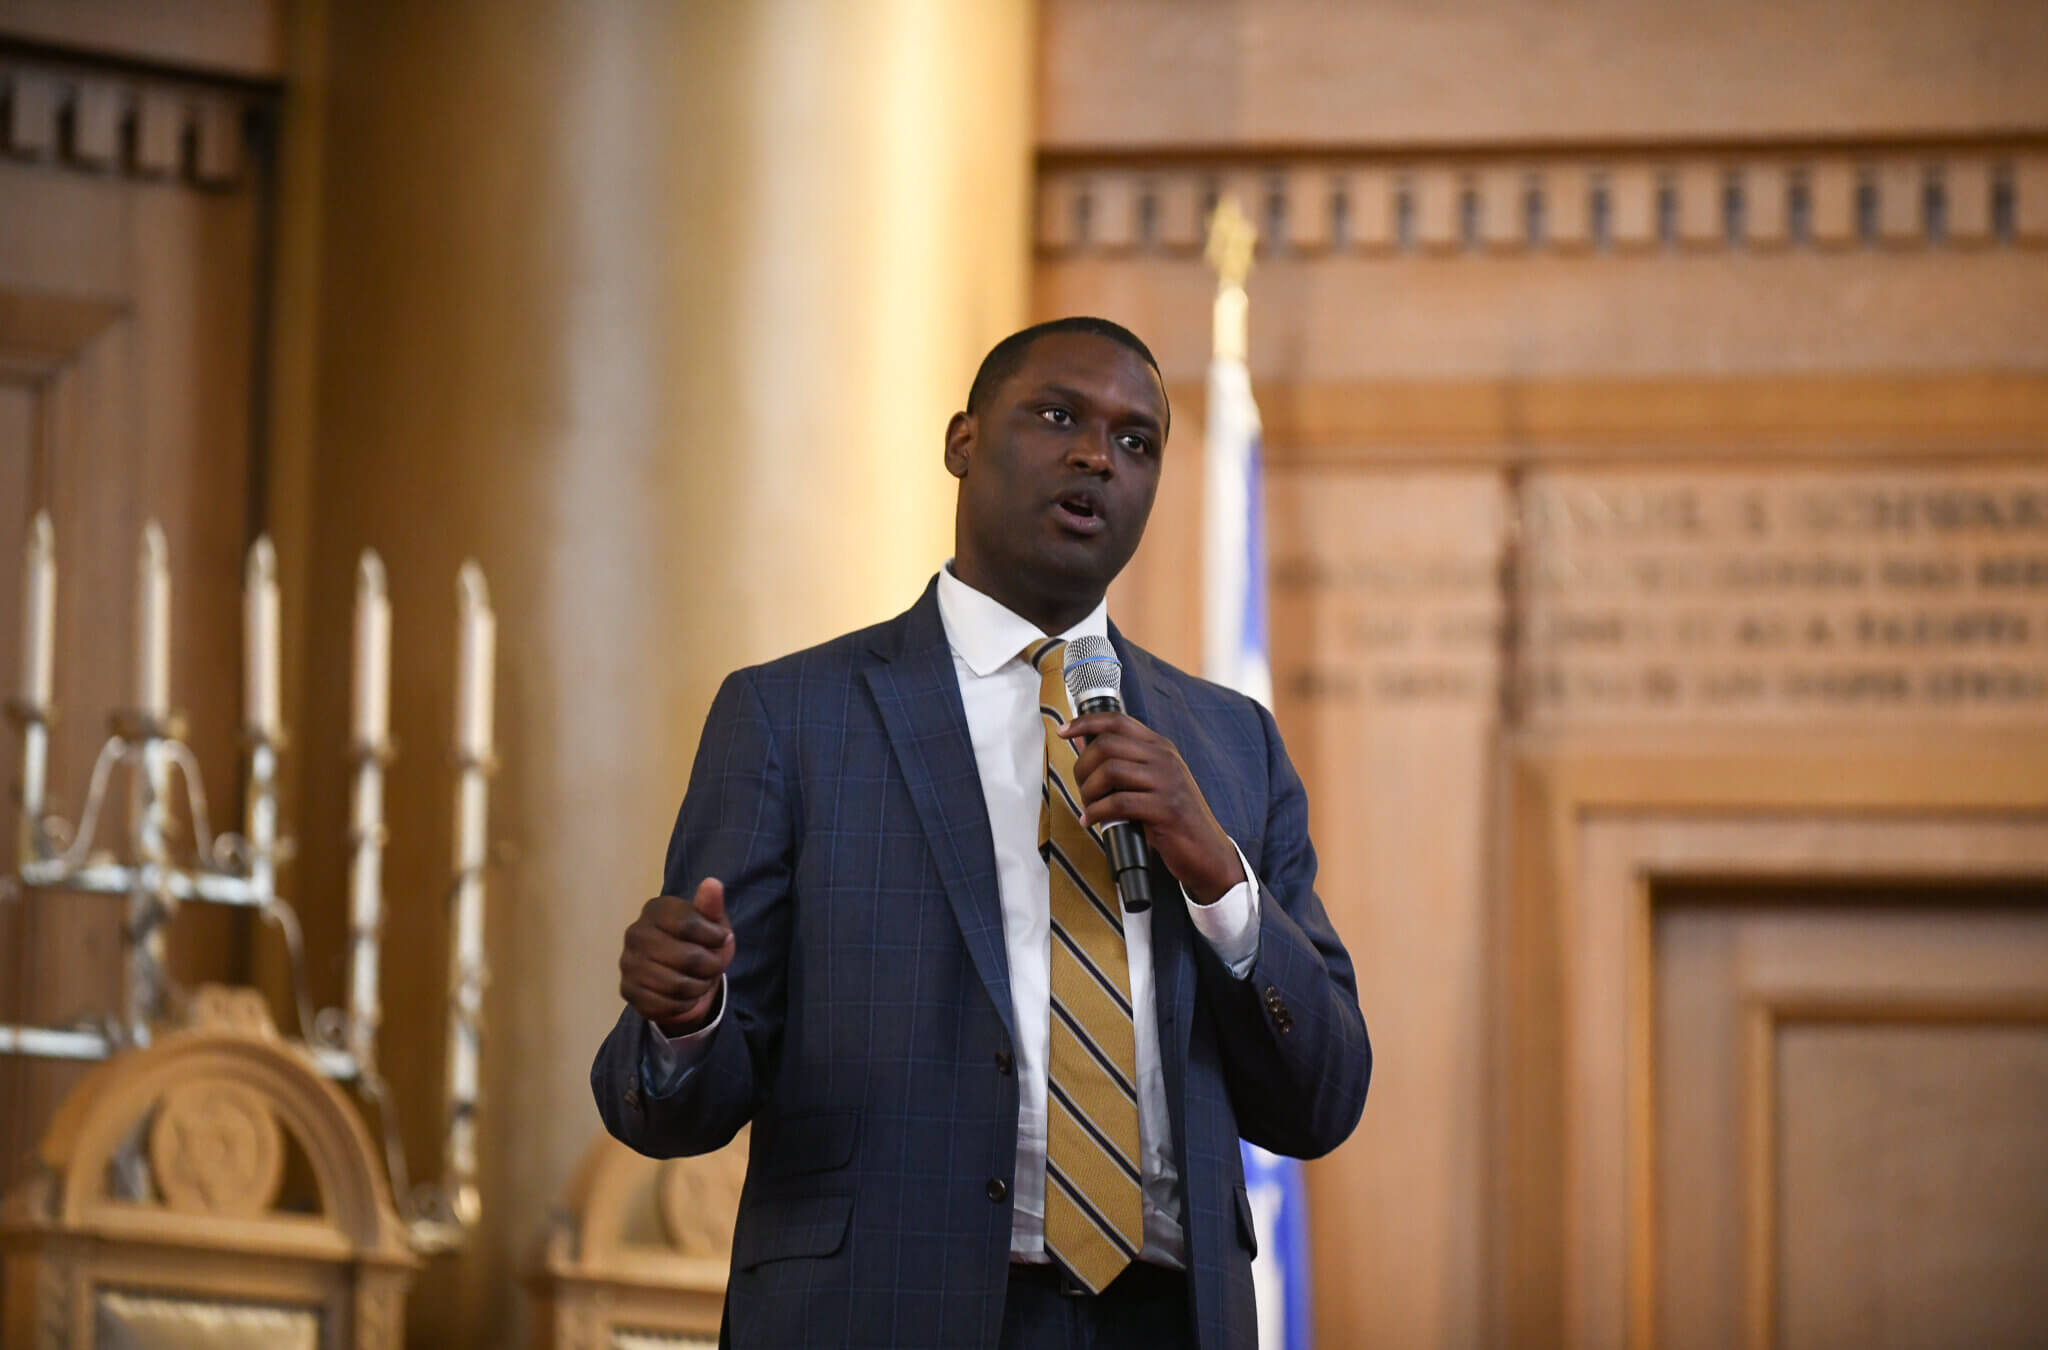 U.S. Rep. Mondaire Jones at a candidate forum for New York's 10th Congressional District co-hosted by the Forward at at Congregation Beth Elohim (CBE) in Brooklyn on July 26, 2022.